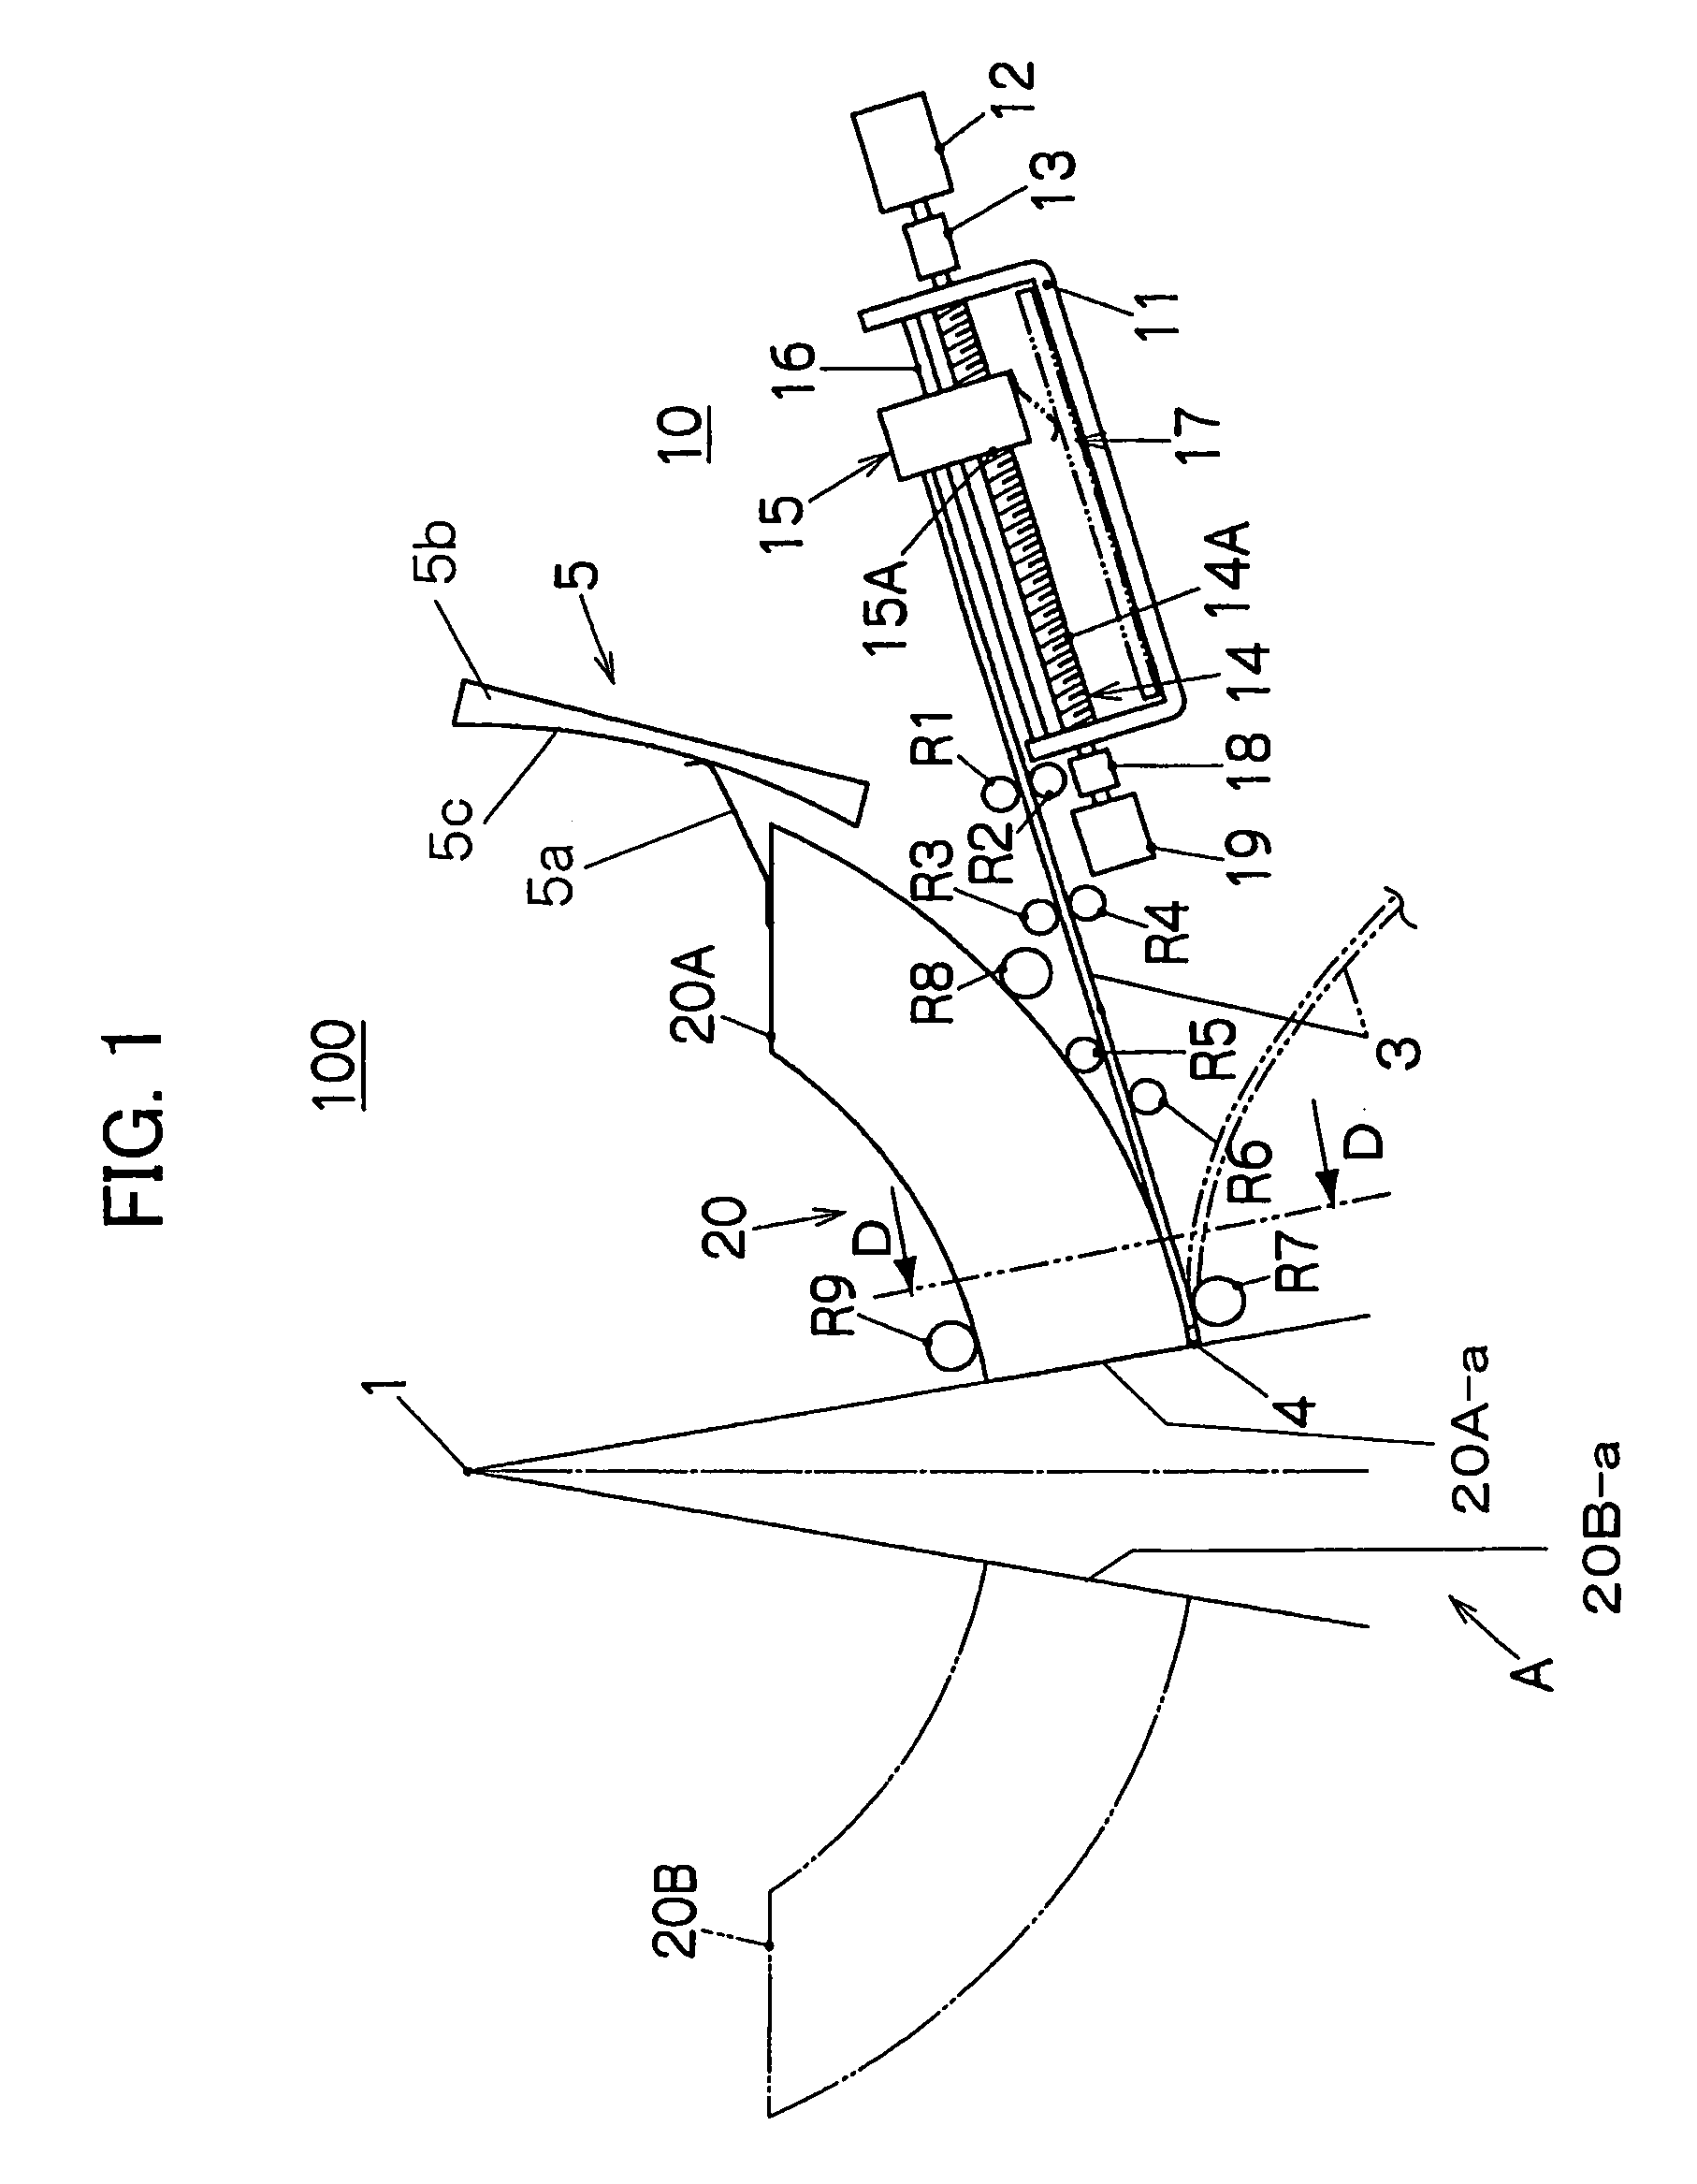 Device for limiting field on which radiation is irradiated